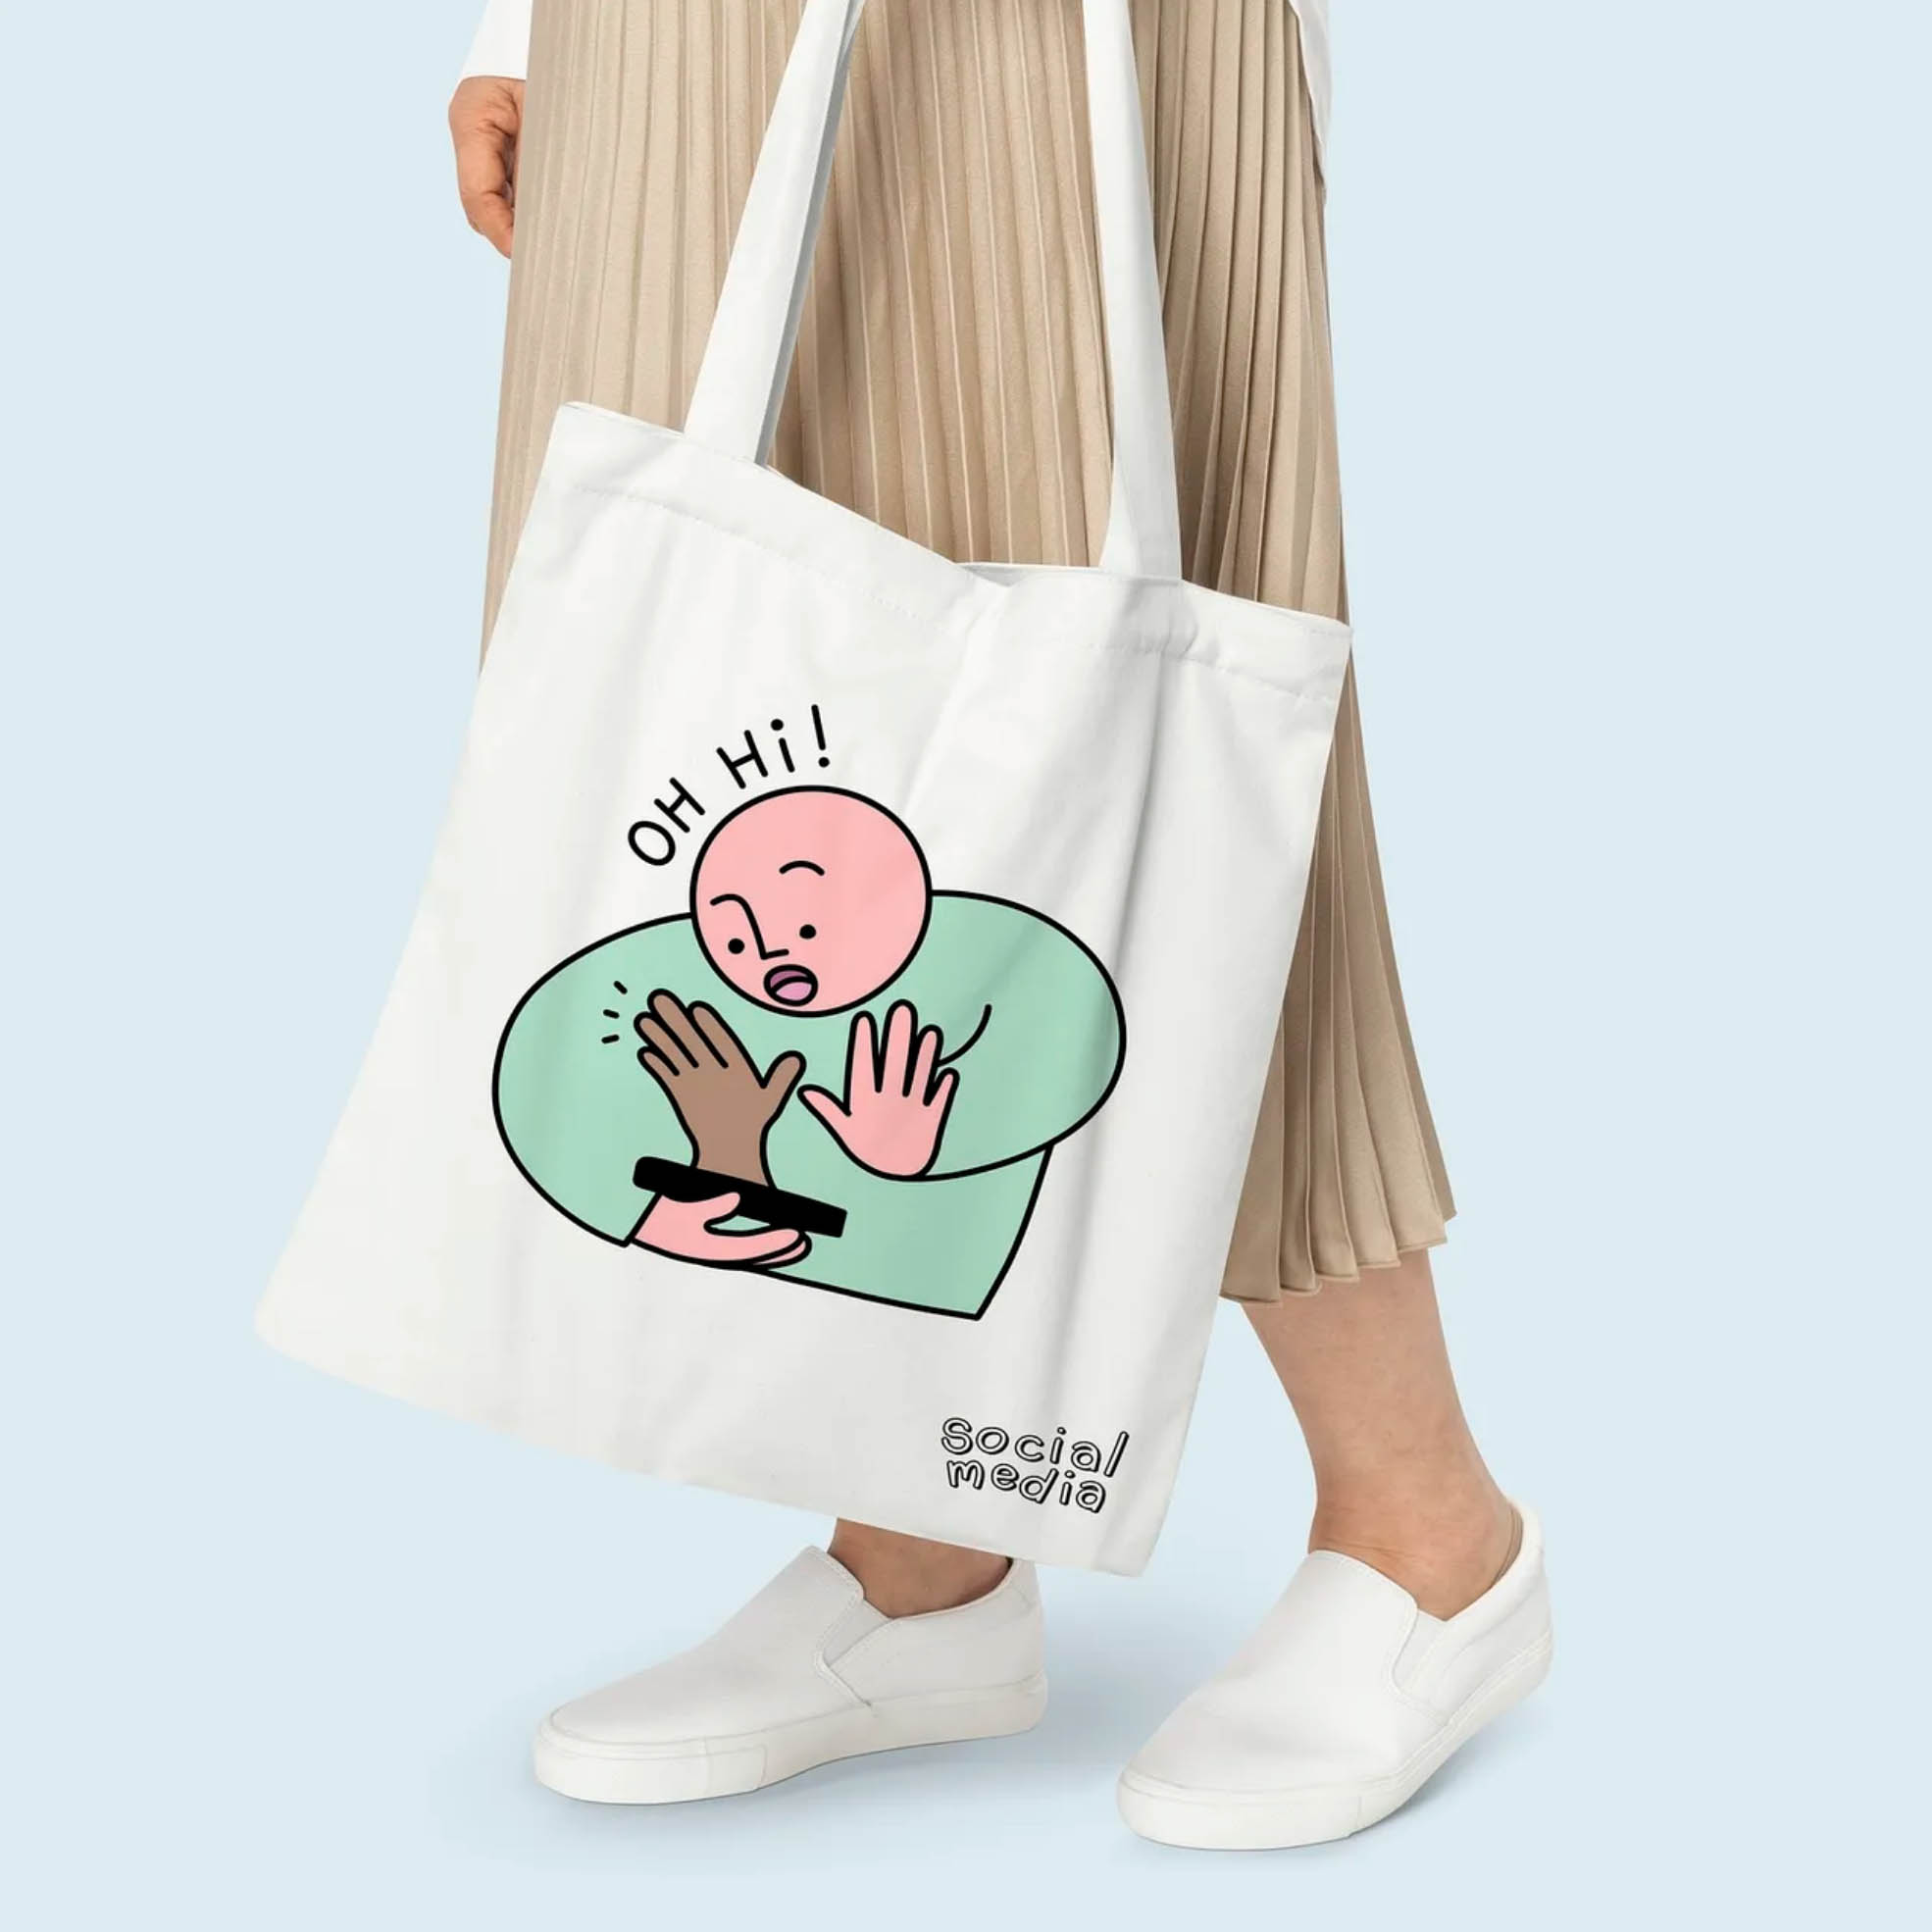 Custom Color Canvas Shopping Bag Made in Thailand